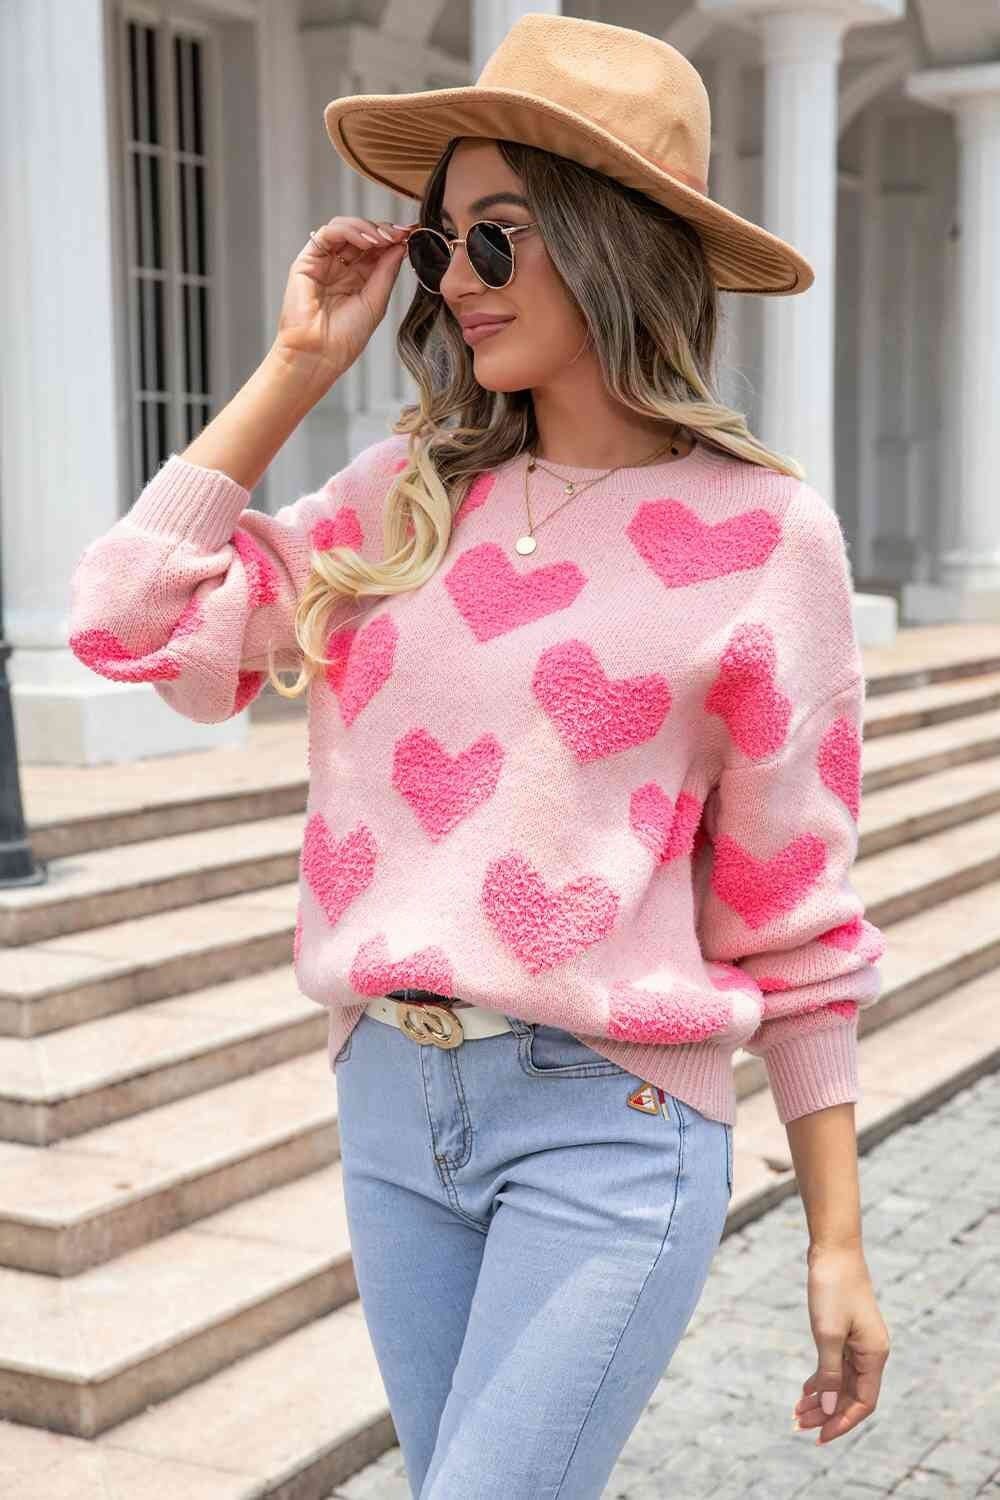 Valentine’s Day Heart Embroidered Patch Cardigan Sweater, Women’s Sizes S-L, Love Heart Embroidery, Loose Oversized Sleeve, Sweetheart Gift